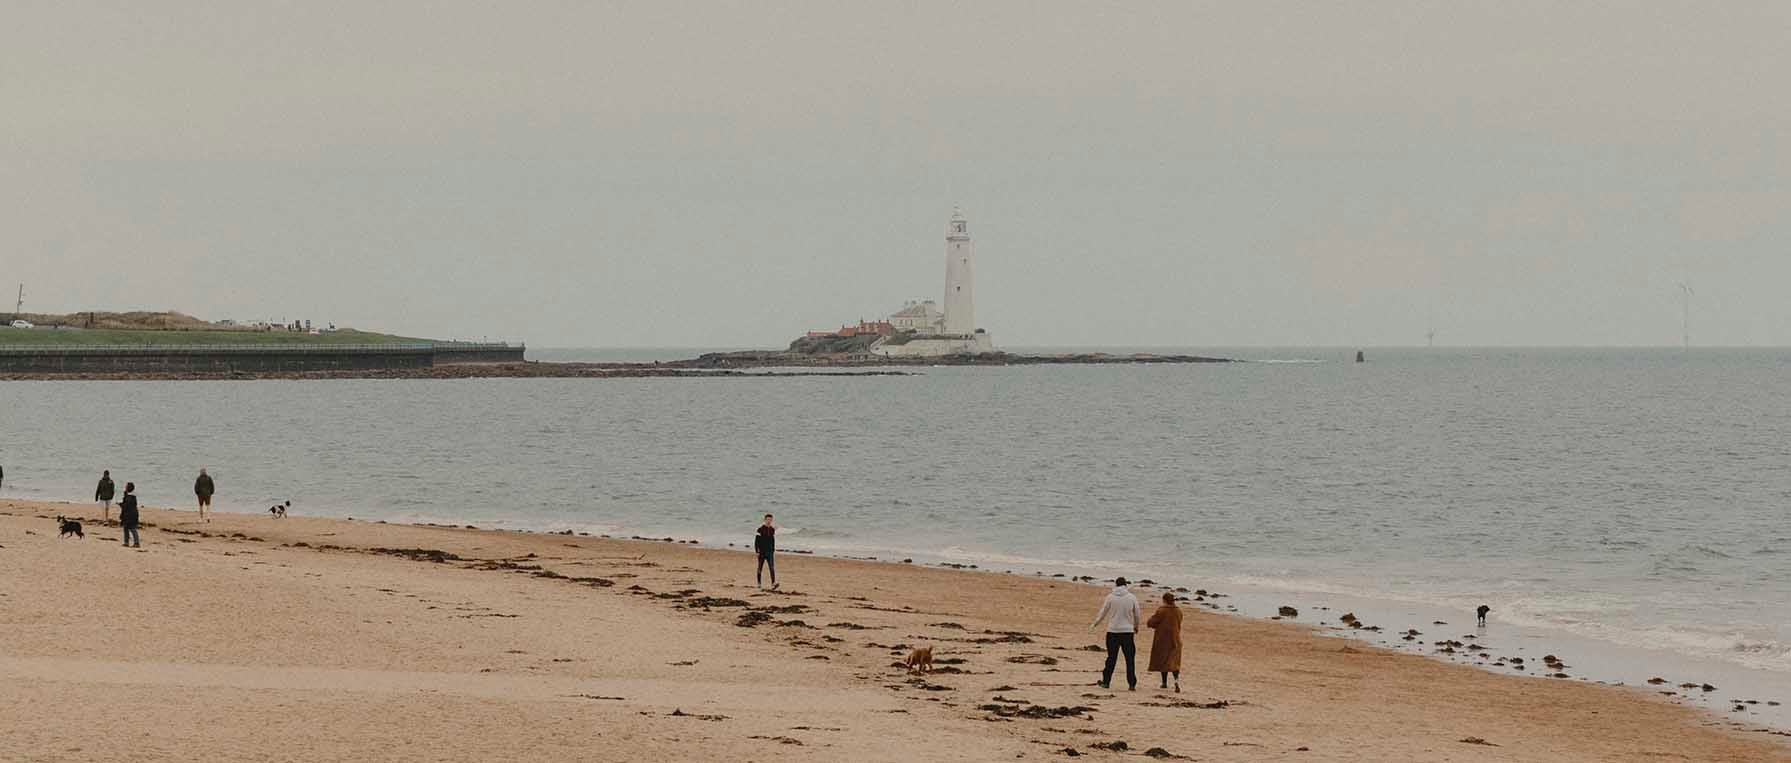 Whitley Bay beach, with a light house in the distance.